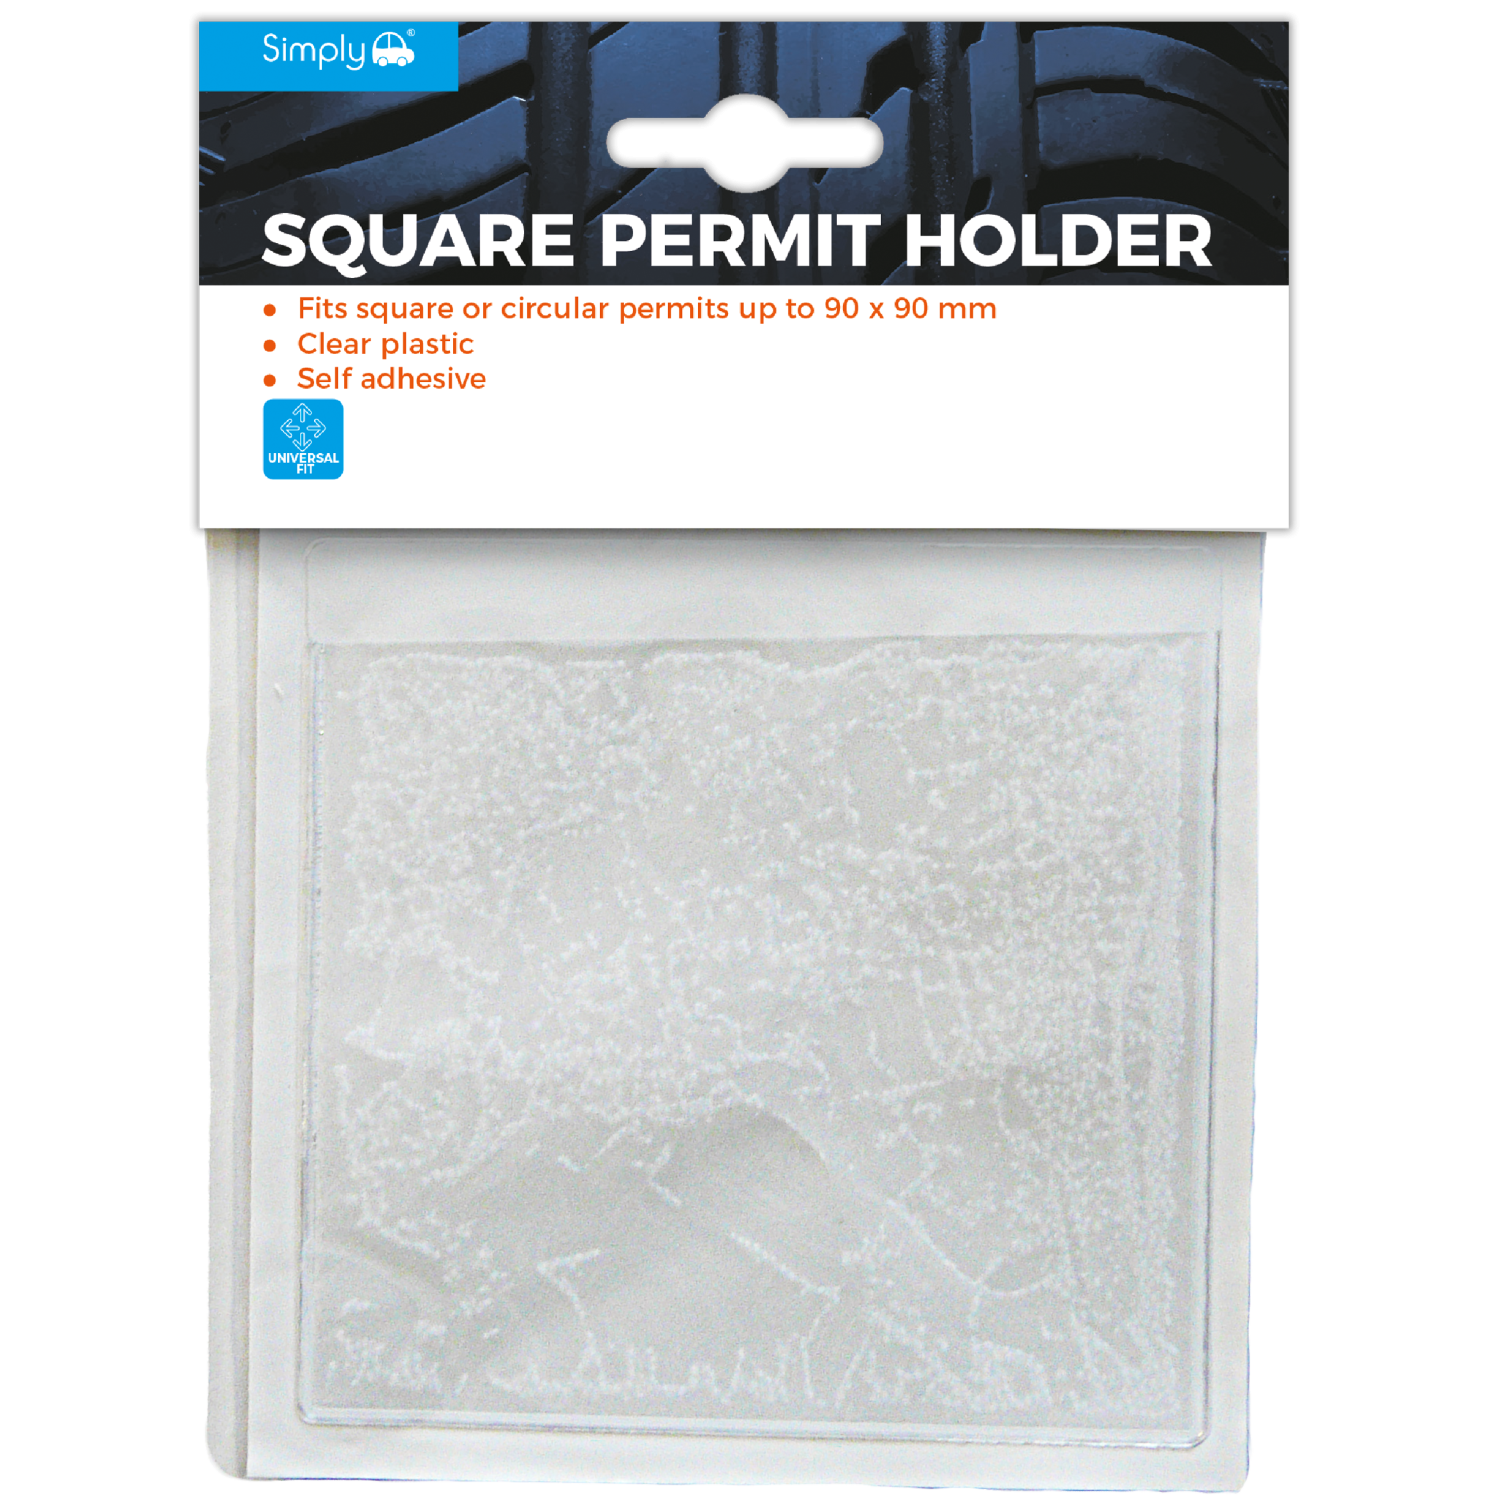 Simply Auto SQUARE PERMIT HOLDER 90MMX90MM - SPH01